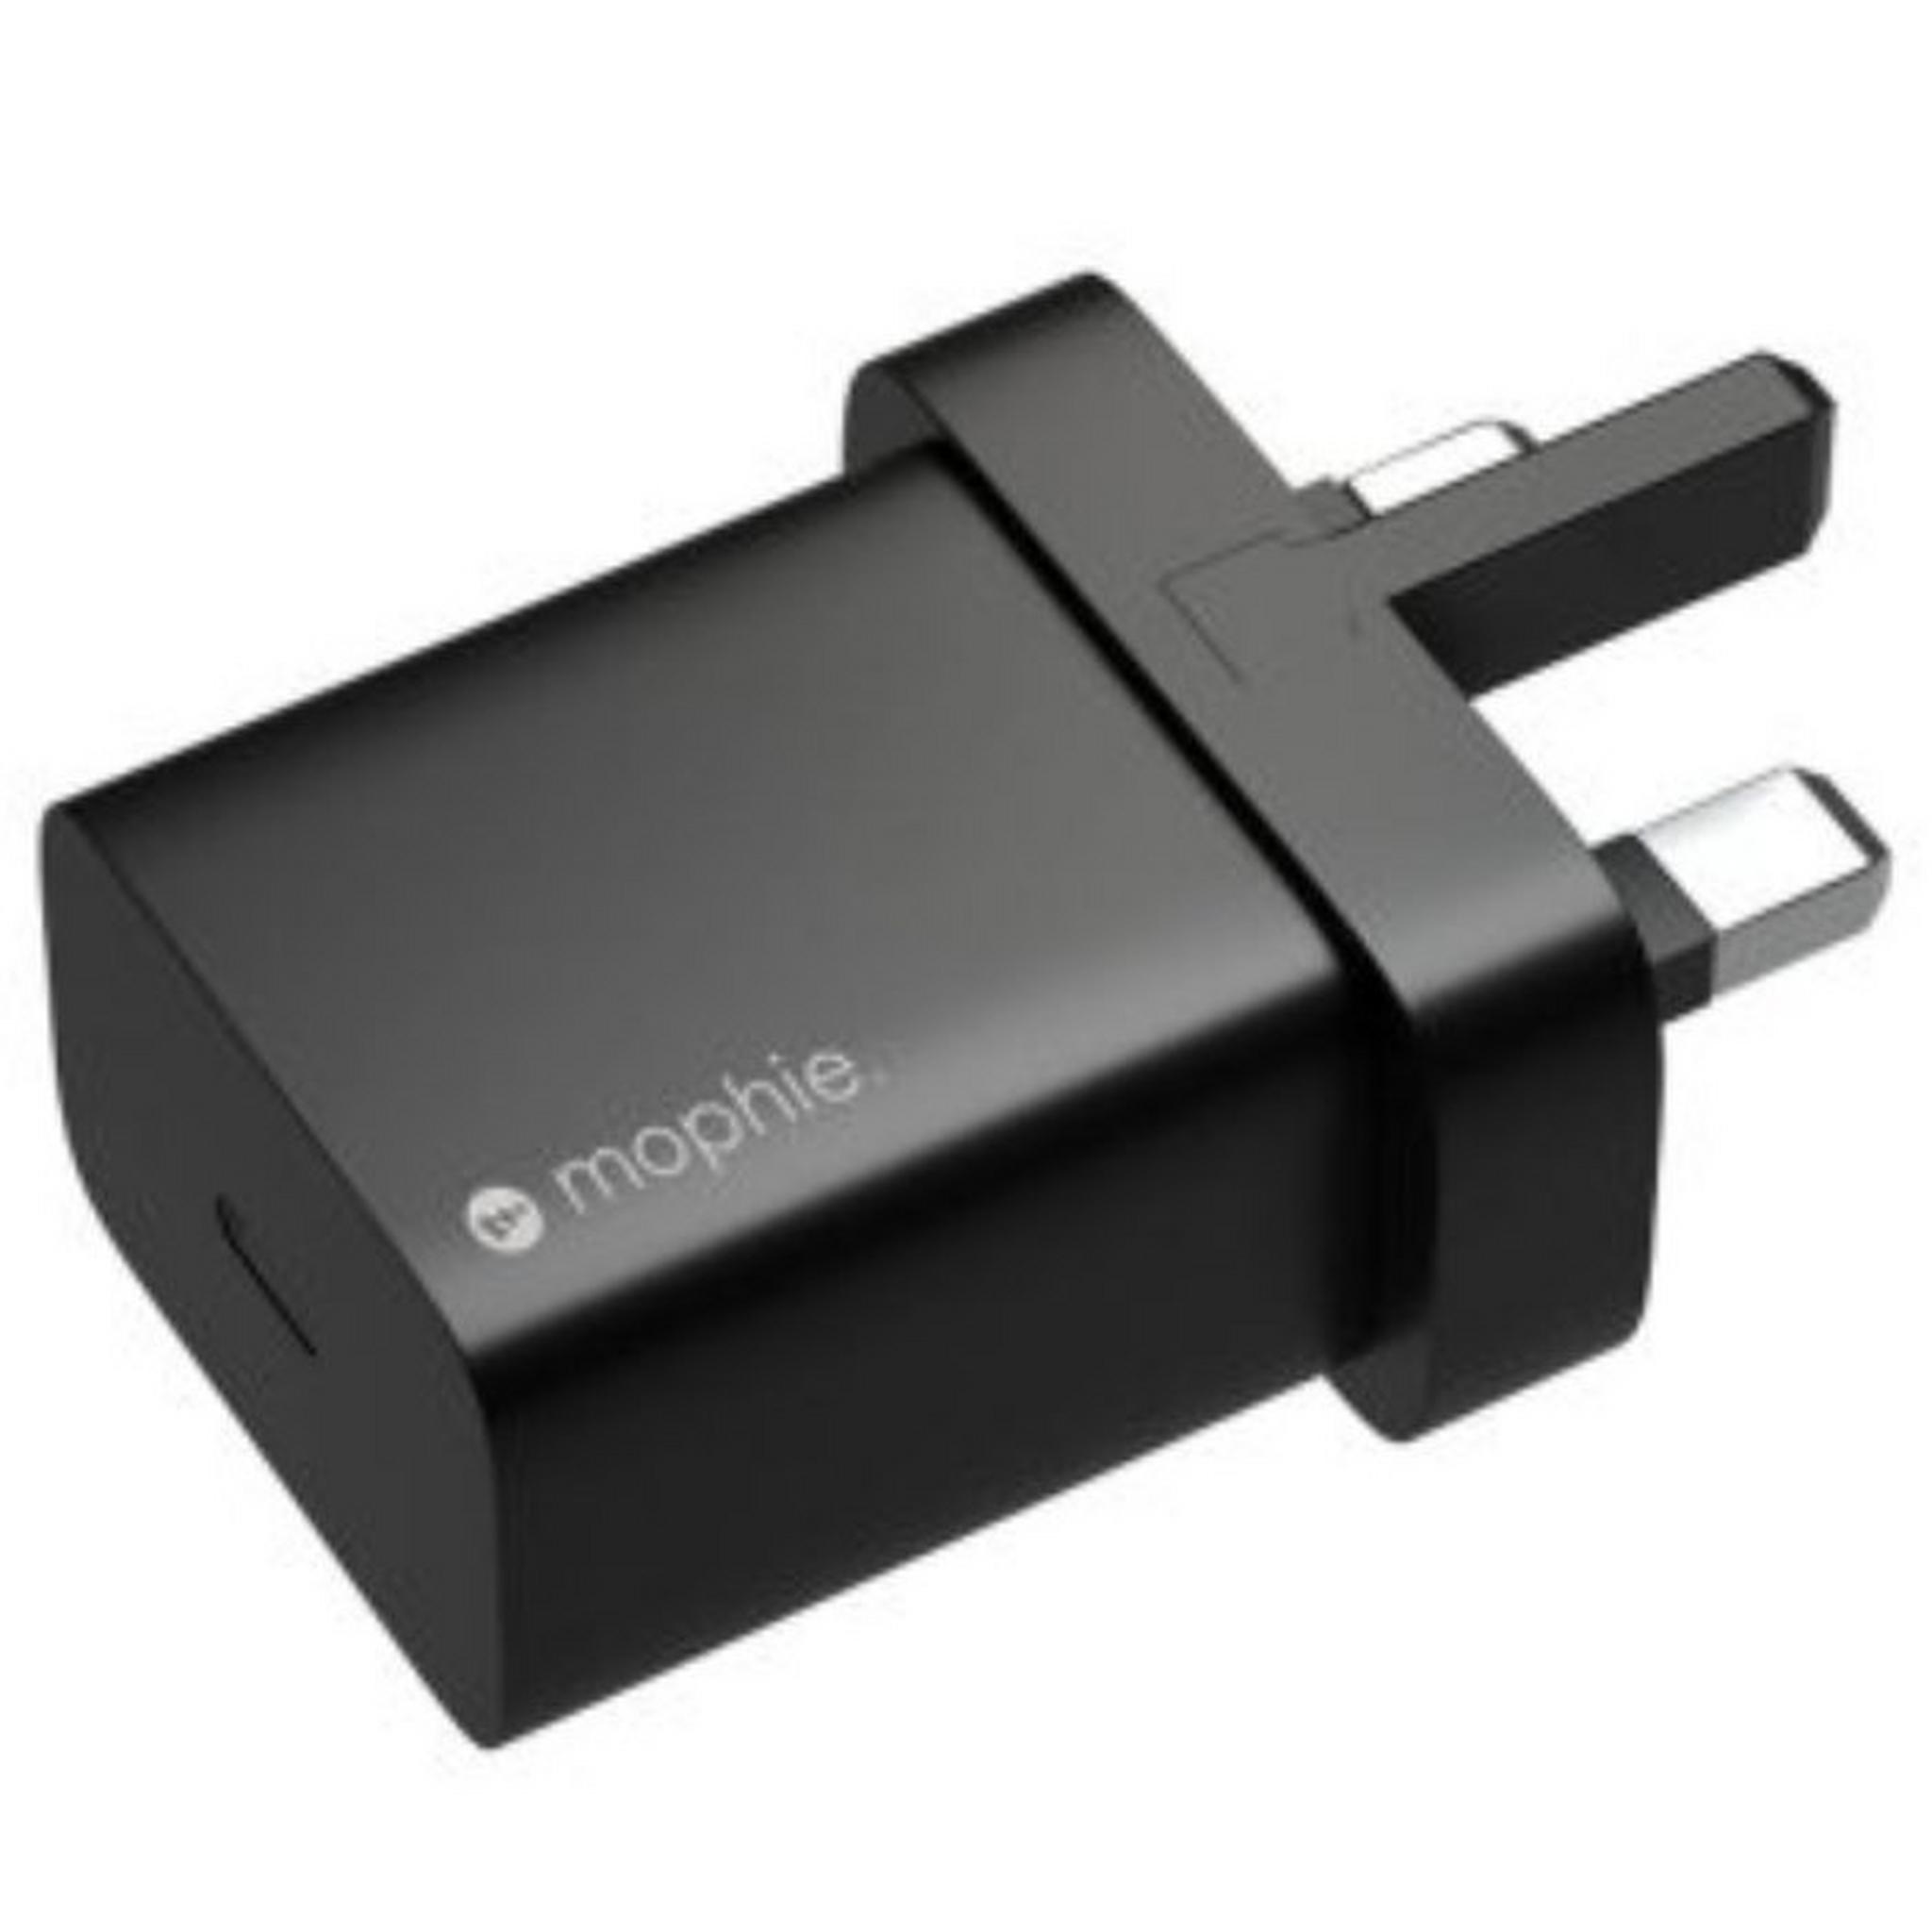 Mophie Fast Charging Mains Adapter with USB-C PD, 20W, 409907456 – Black